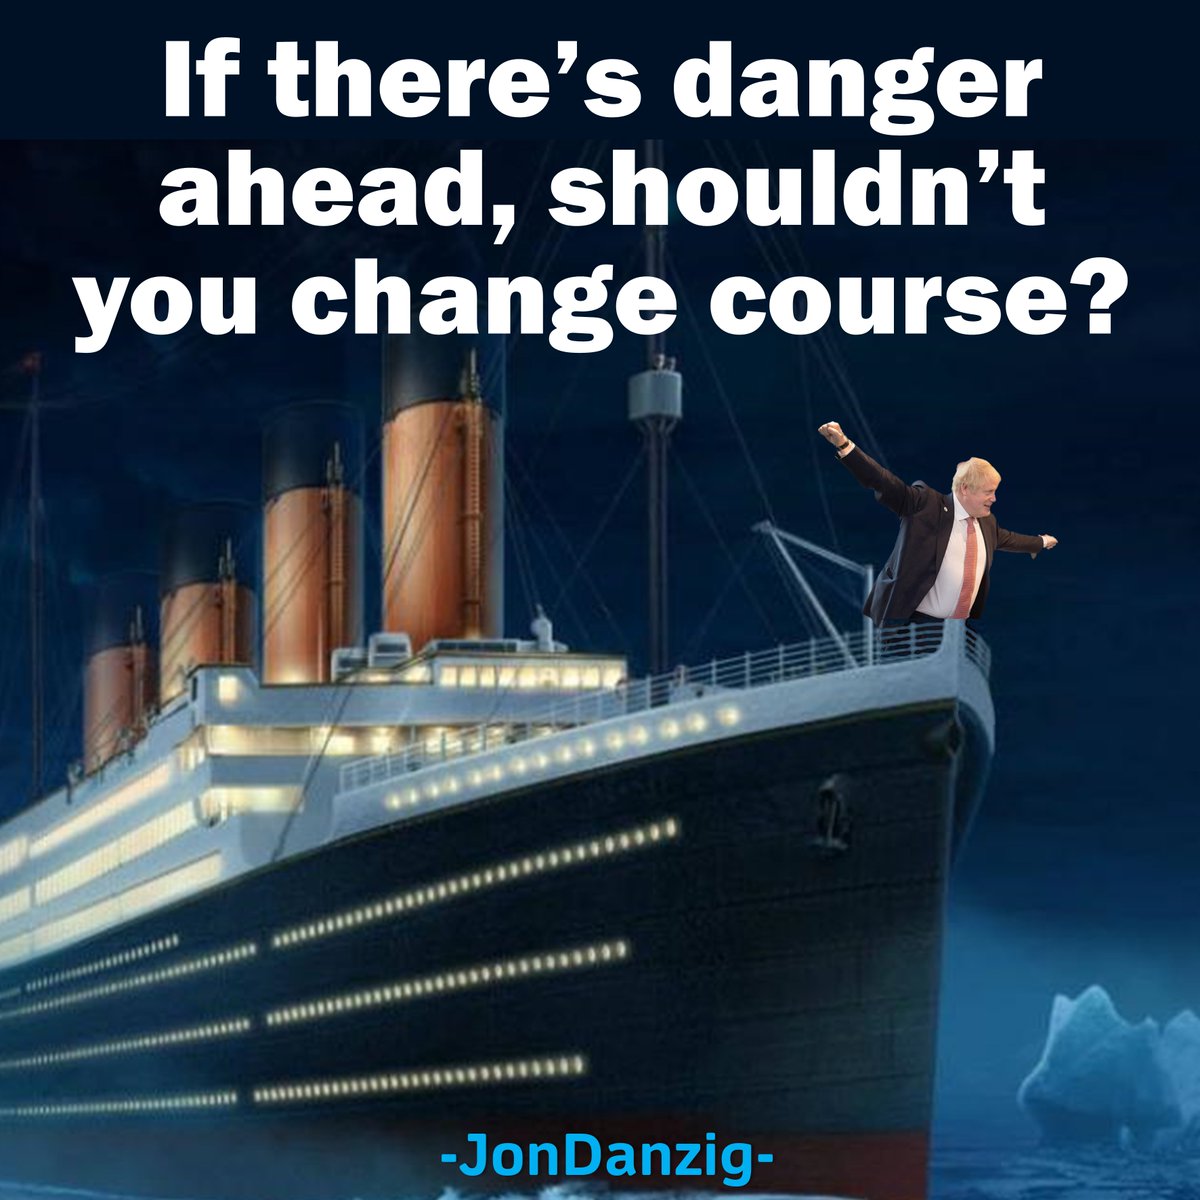 If the #Titanic captain knew there was an iceberg ahead, don’t you think he’d change course? @BorisJohnson knows full well there are perilous hazards ahead. But instead of changing course, he's steering us right into them. My report at: bit.ly/3777UBO #Brexit #Covid19